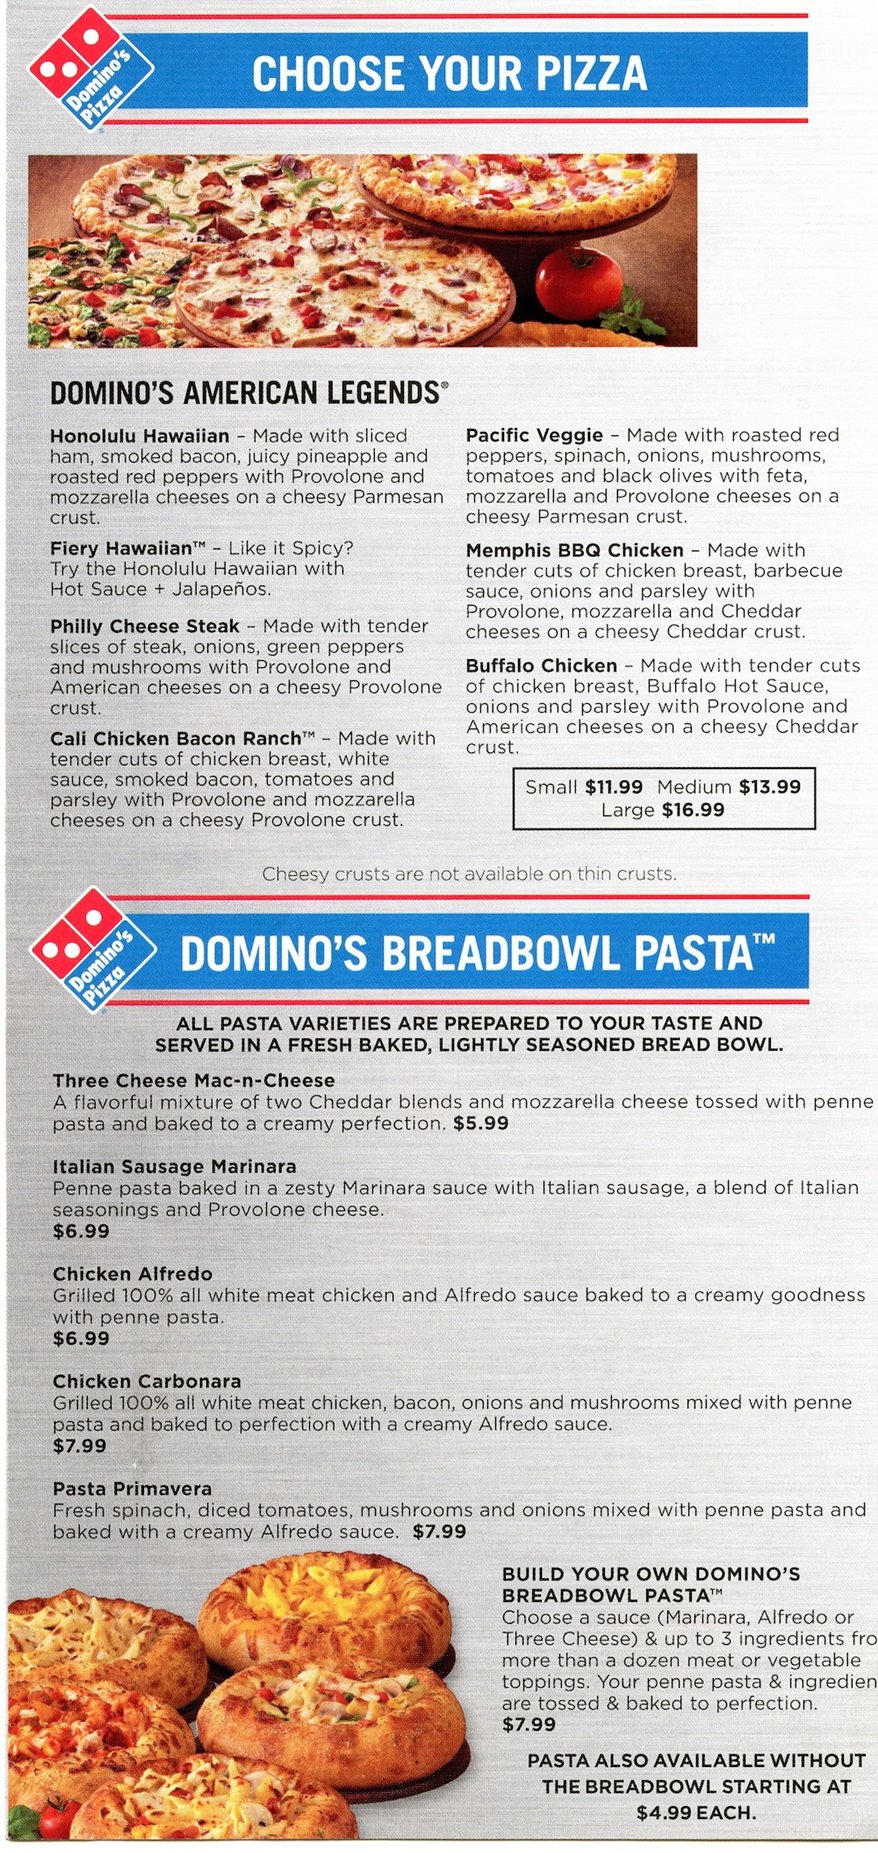 Domino's Printable Menu Order Pizza, Wings, Sandwiches, Salads, And More!